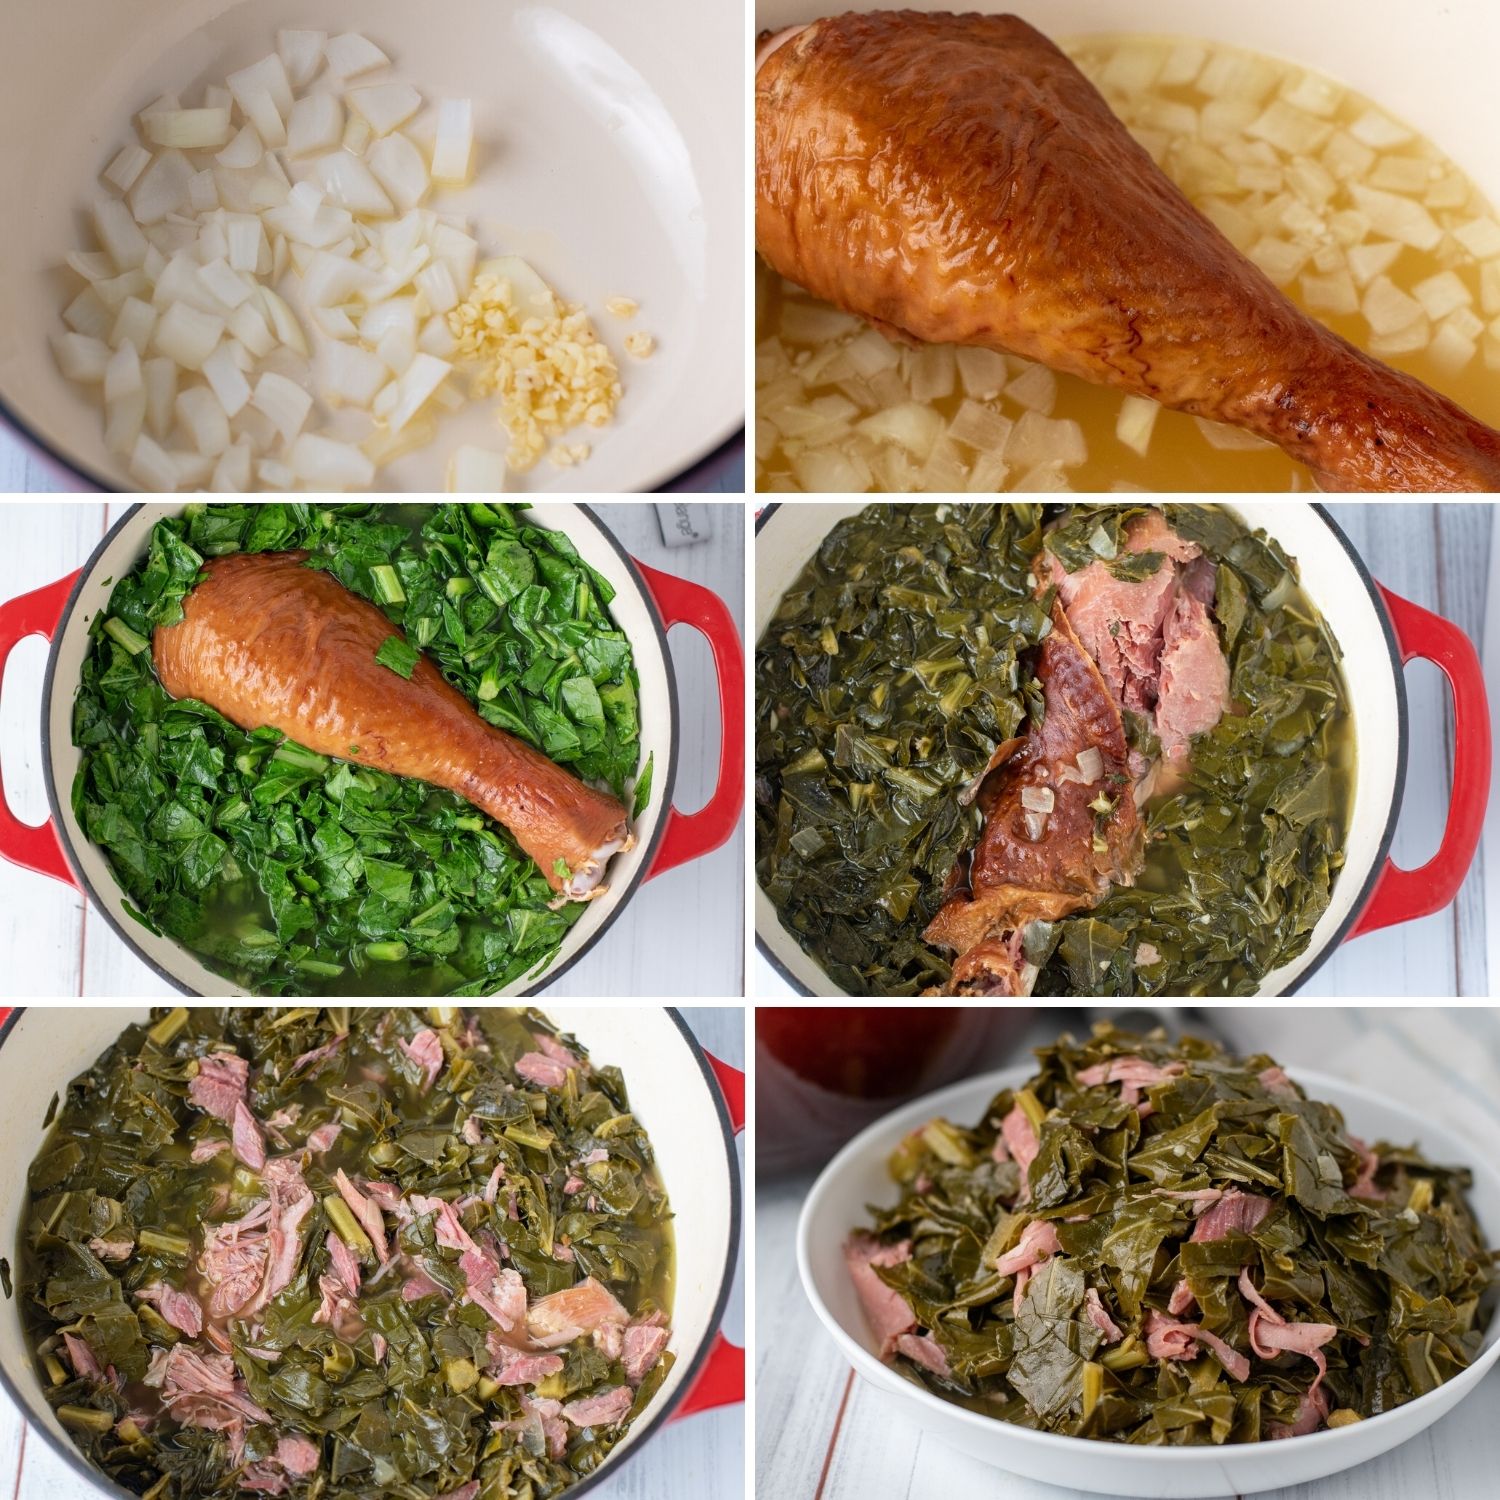 Collard greens step by step instructions